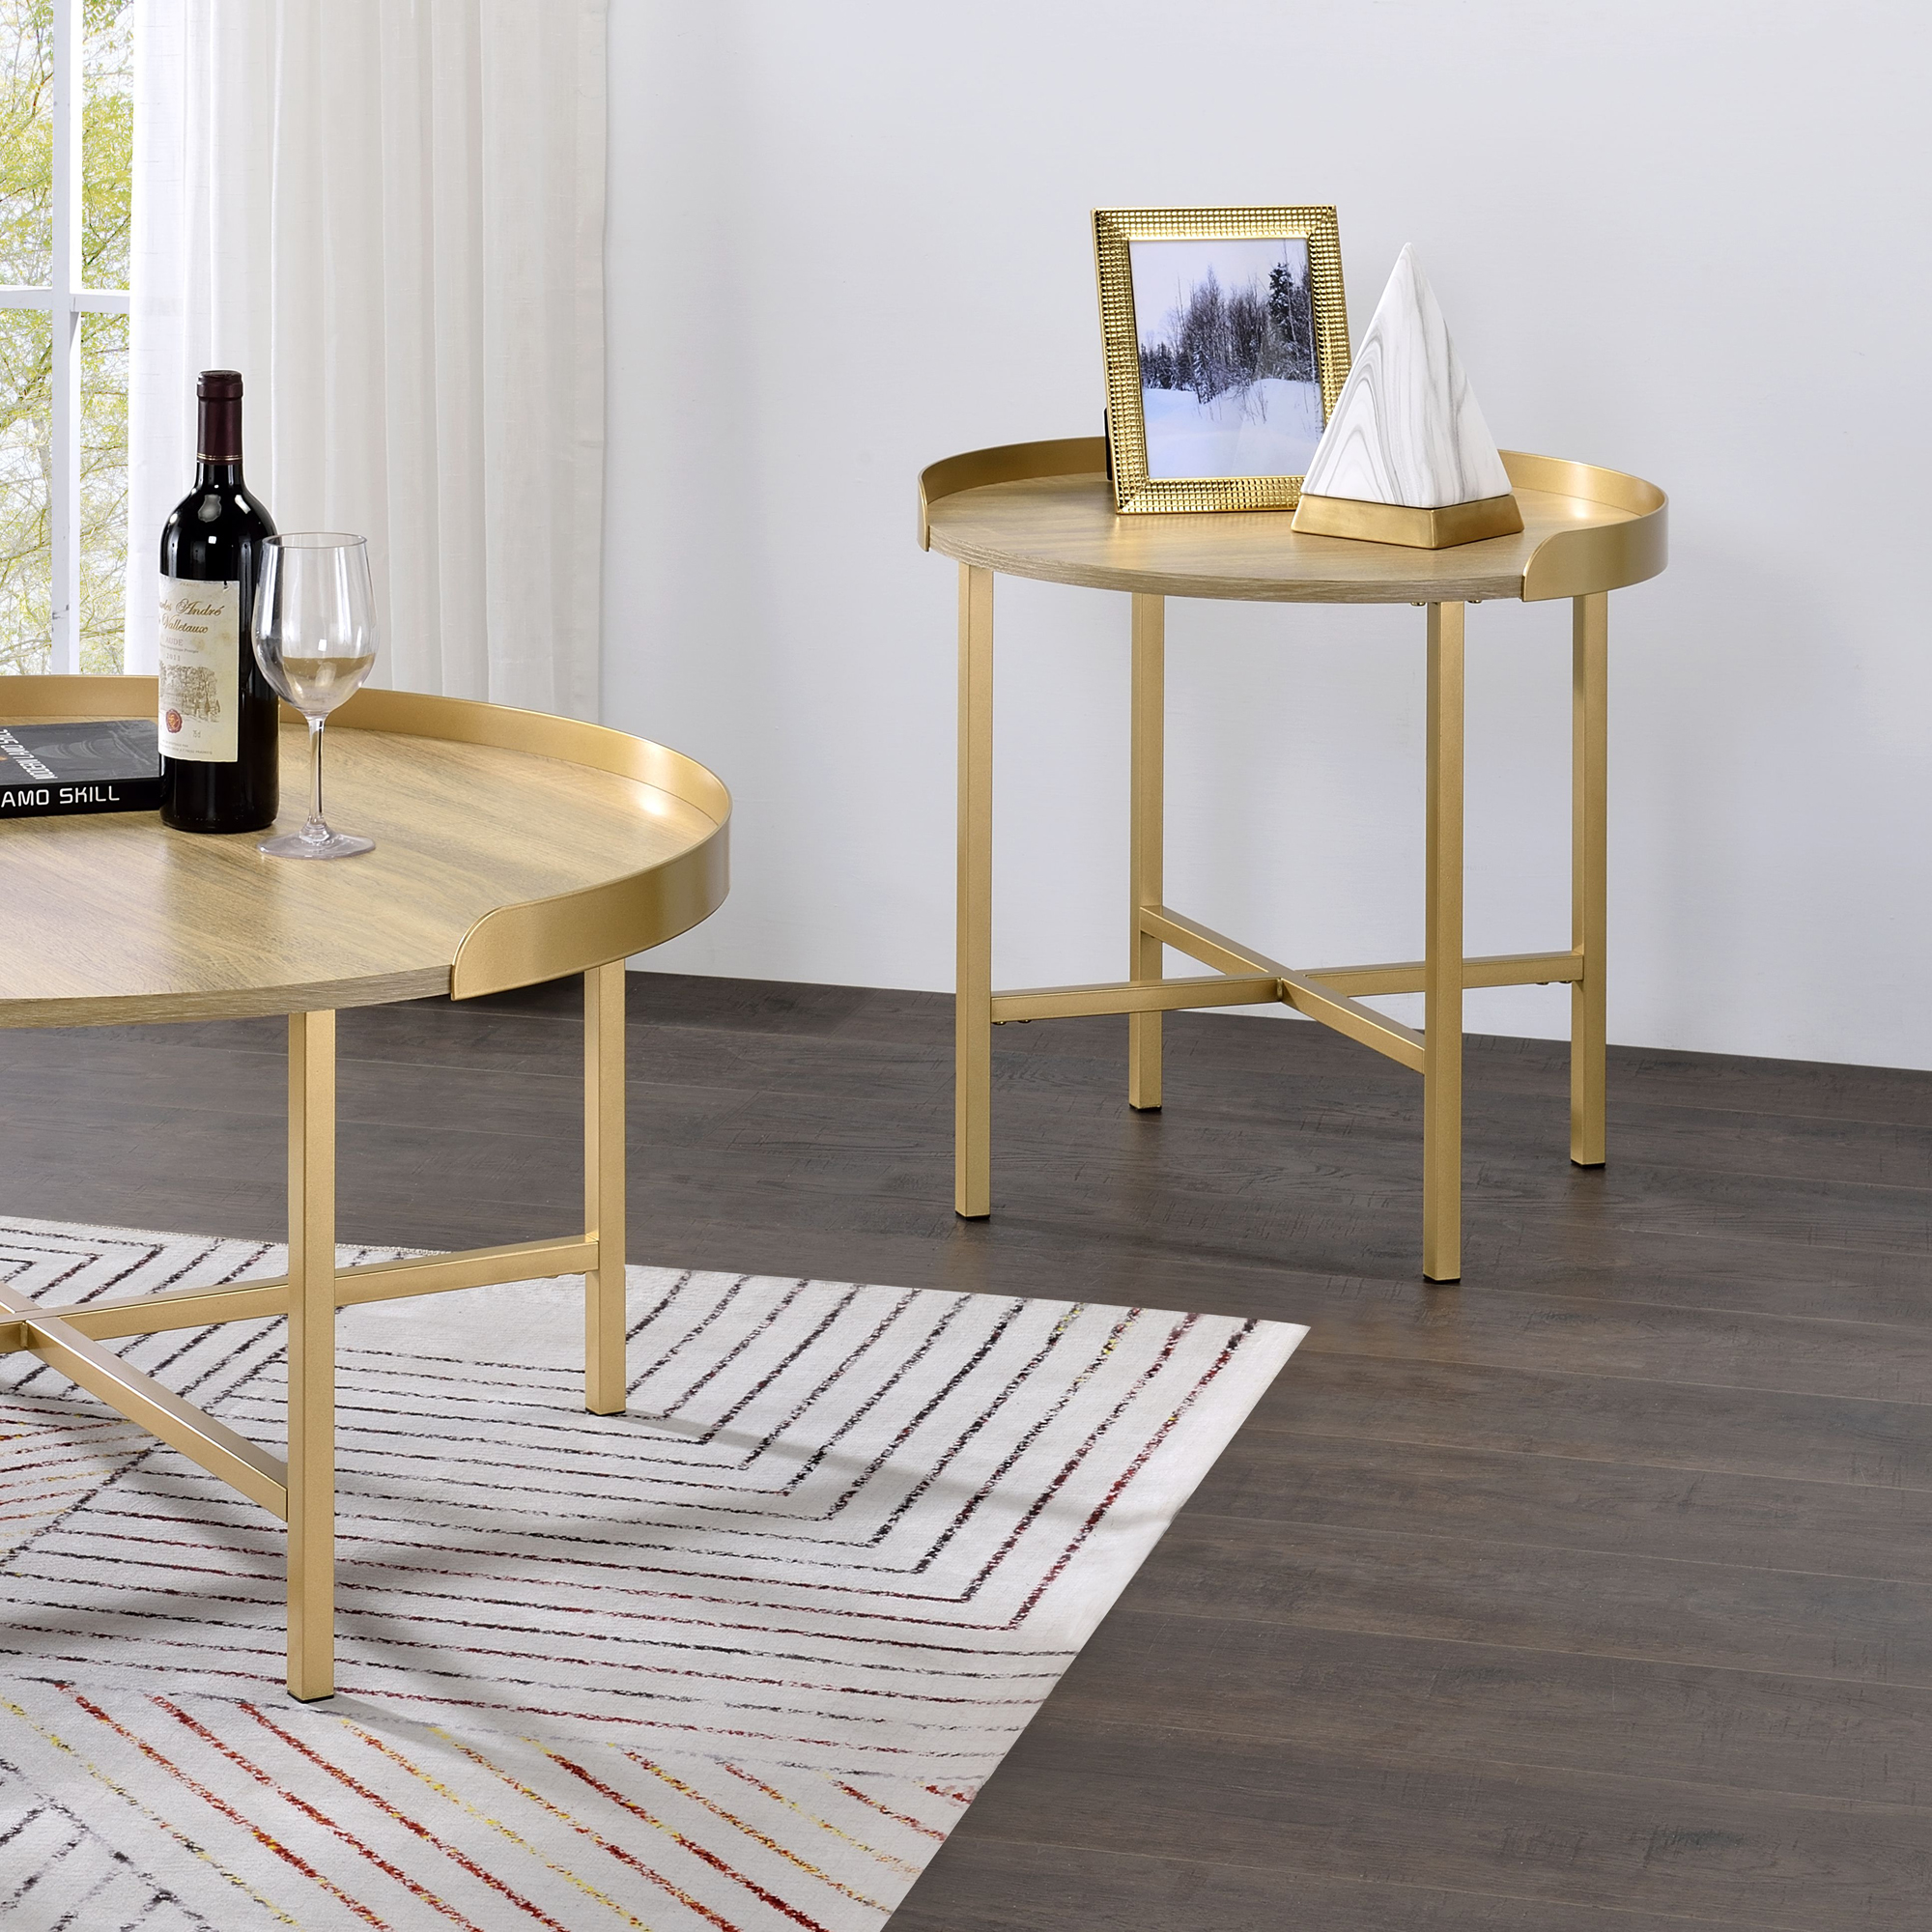 ACME Mithea Round End Table in Oak and Gold - image 3 of 5